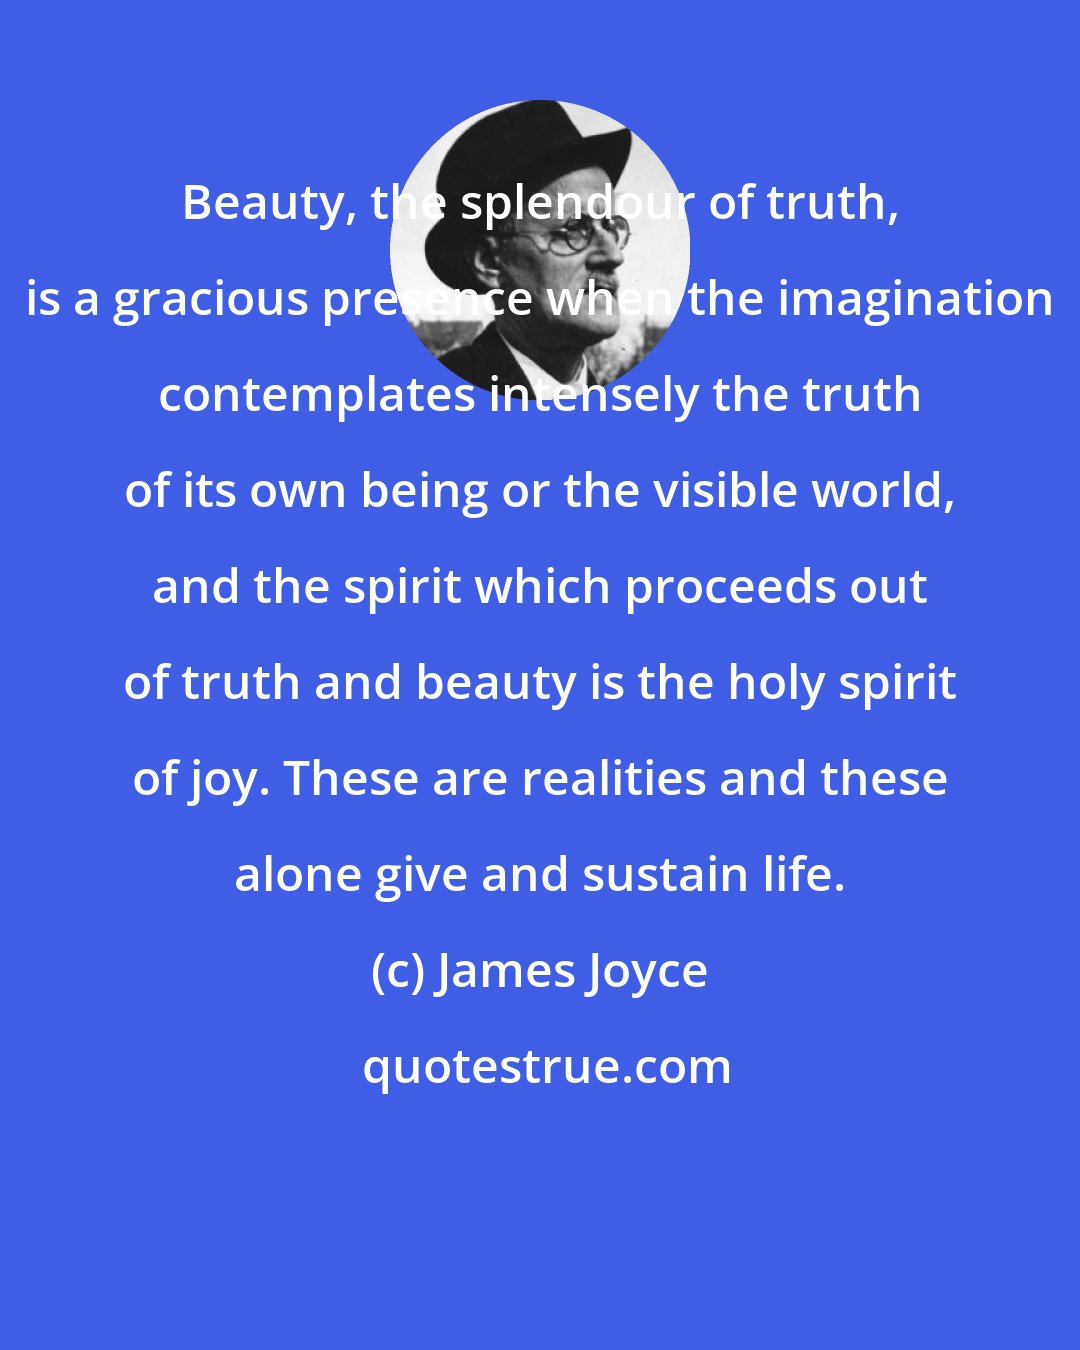 James Joyce: Beauty, the splendour of truth, is a gracious presence when the imagination contemplates intensely the truth of its own being or the visible world, and the spirit which proceeds out of truth and beauty is the holy spirit of joy. These are realities and these alone give and sustain life.